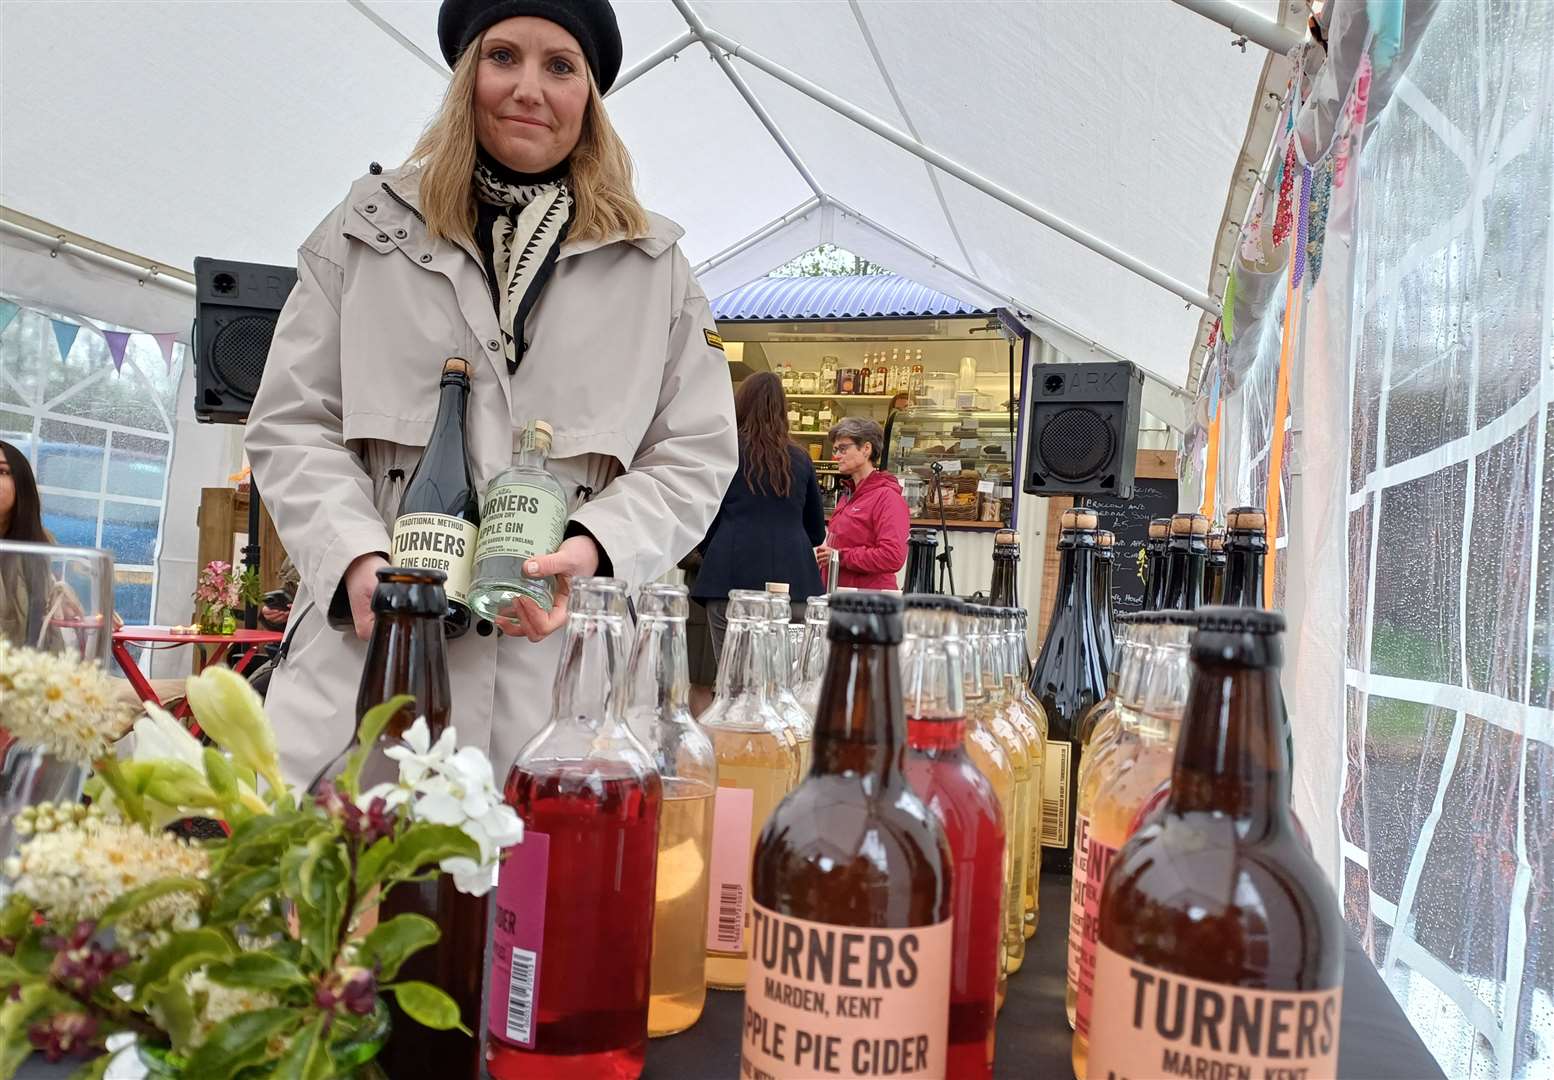 May Turner brought her range of ciders from Marden which will be sold at the new shop. Picture: Ben Austin